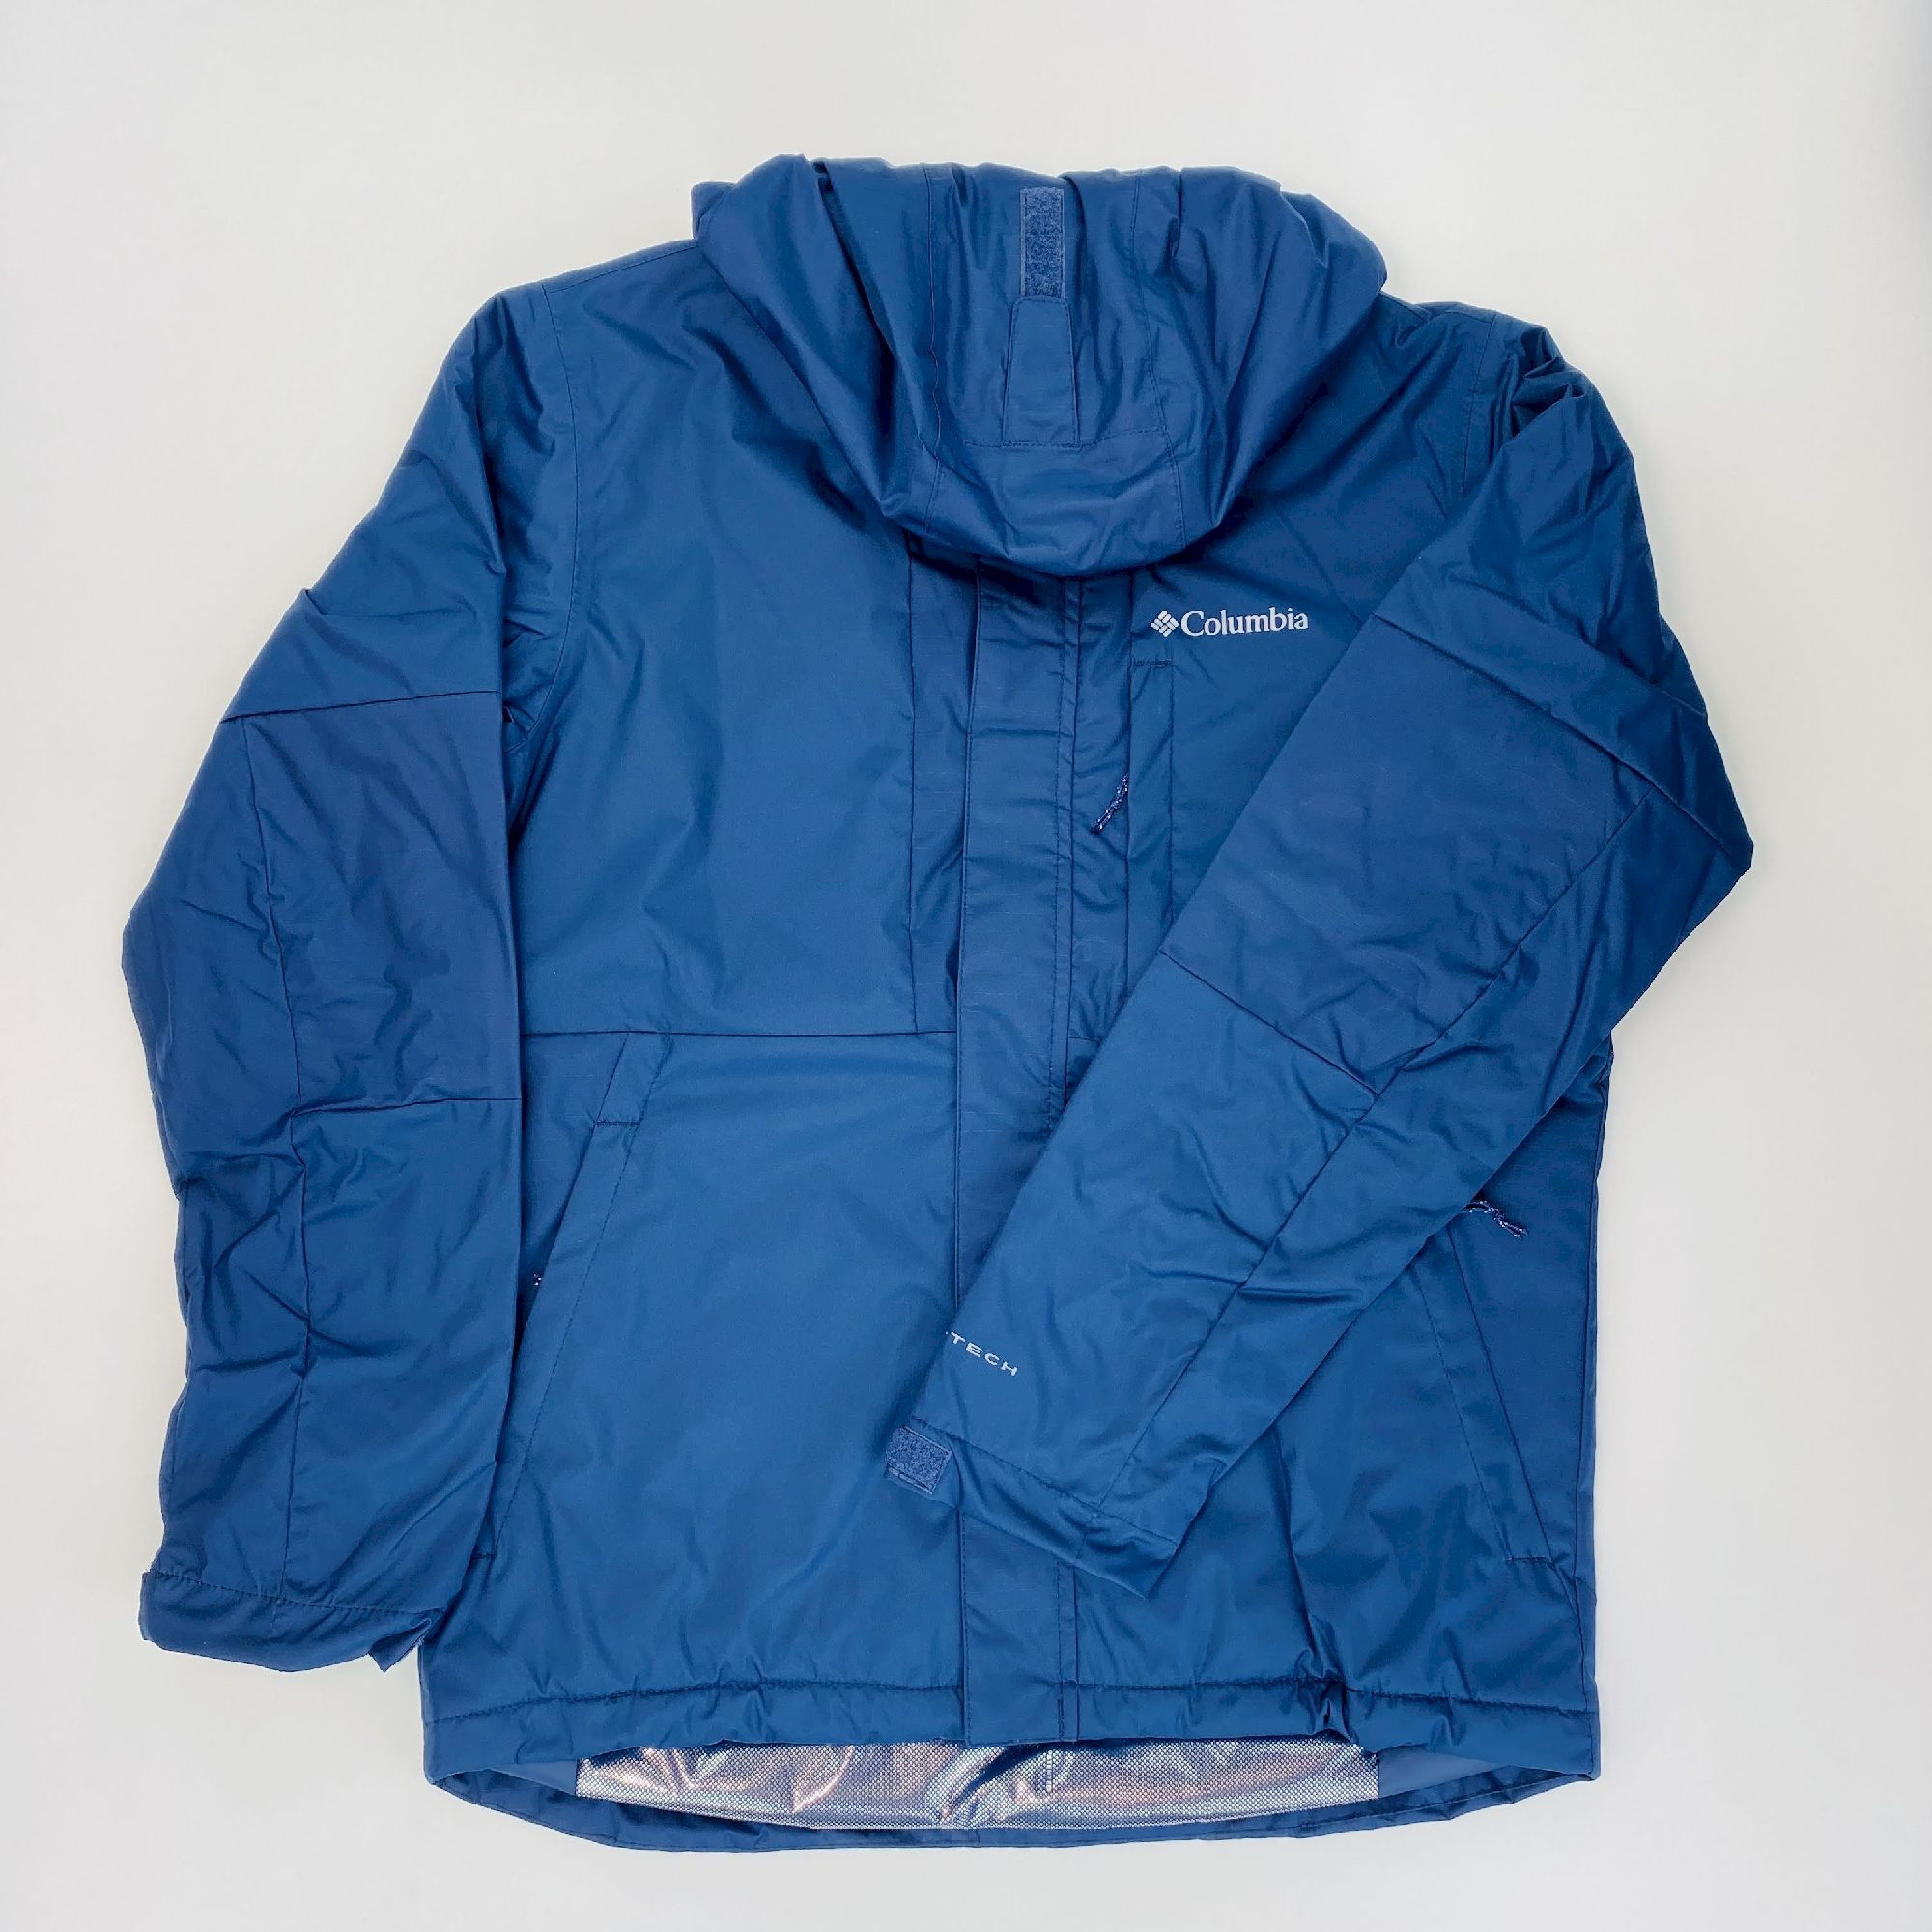 Columbia Oso Mountain™ Insulated Jacket - Seconde main Veste imperméable homme - Bleu - M | Hardloop